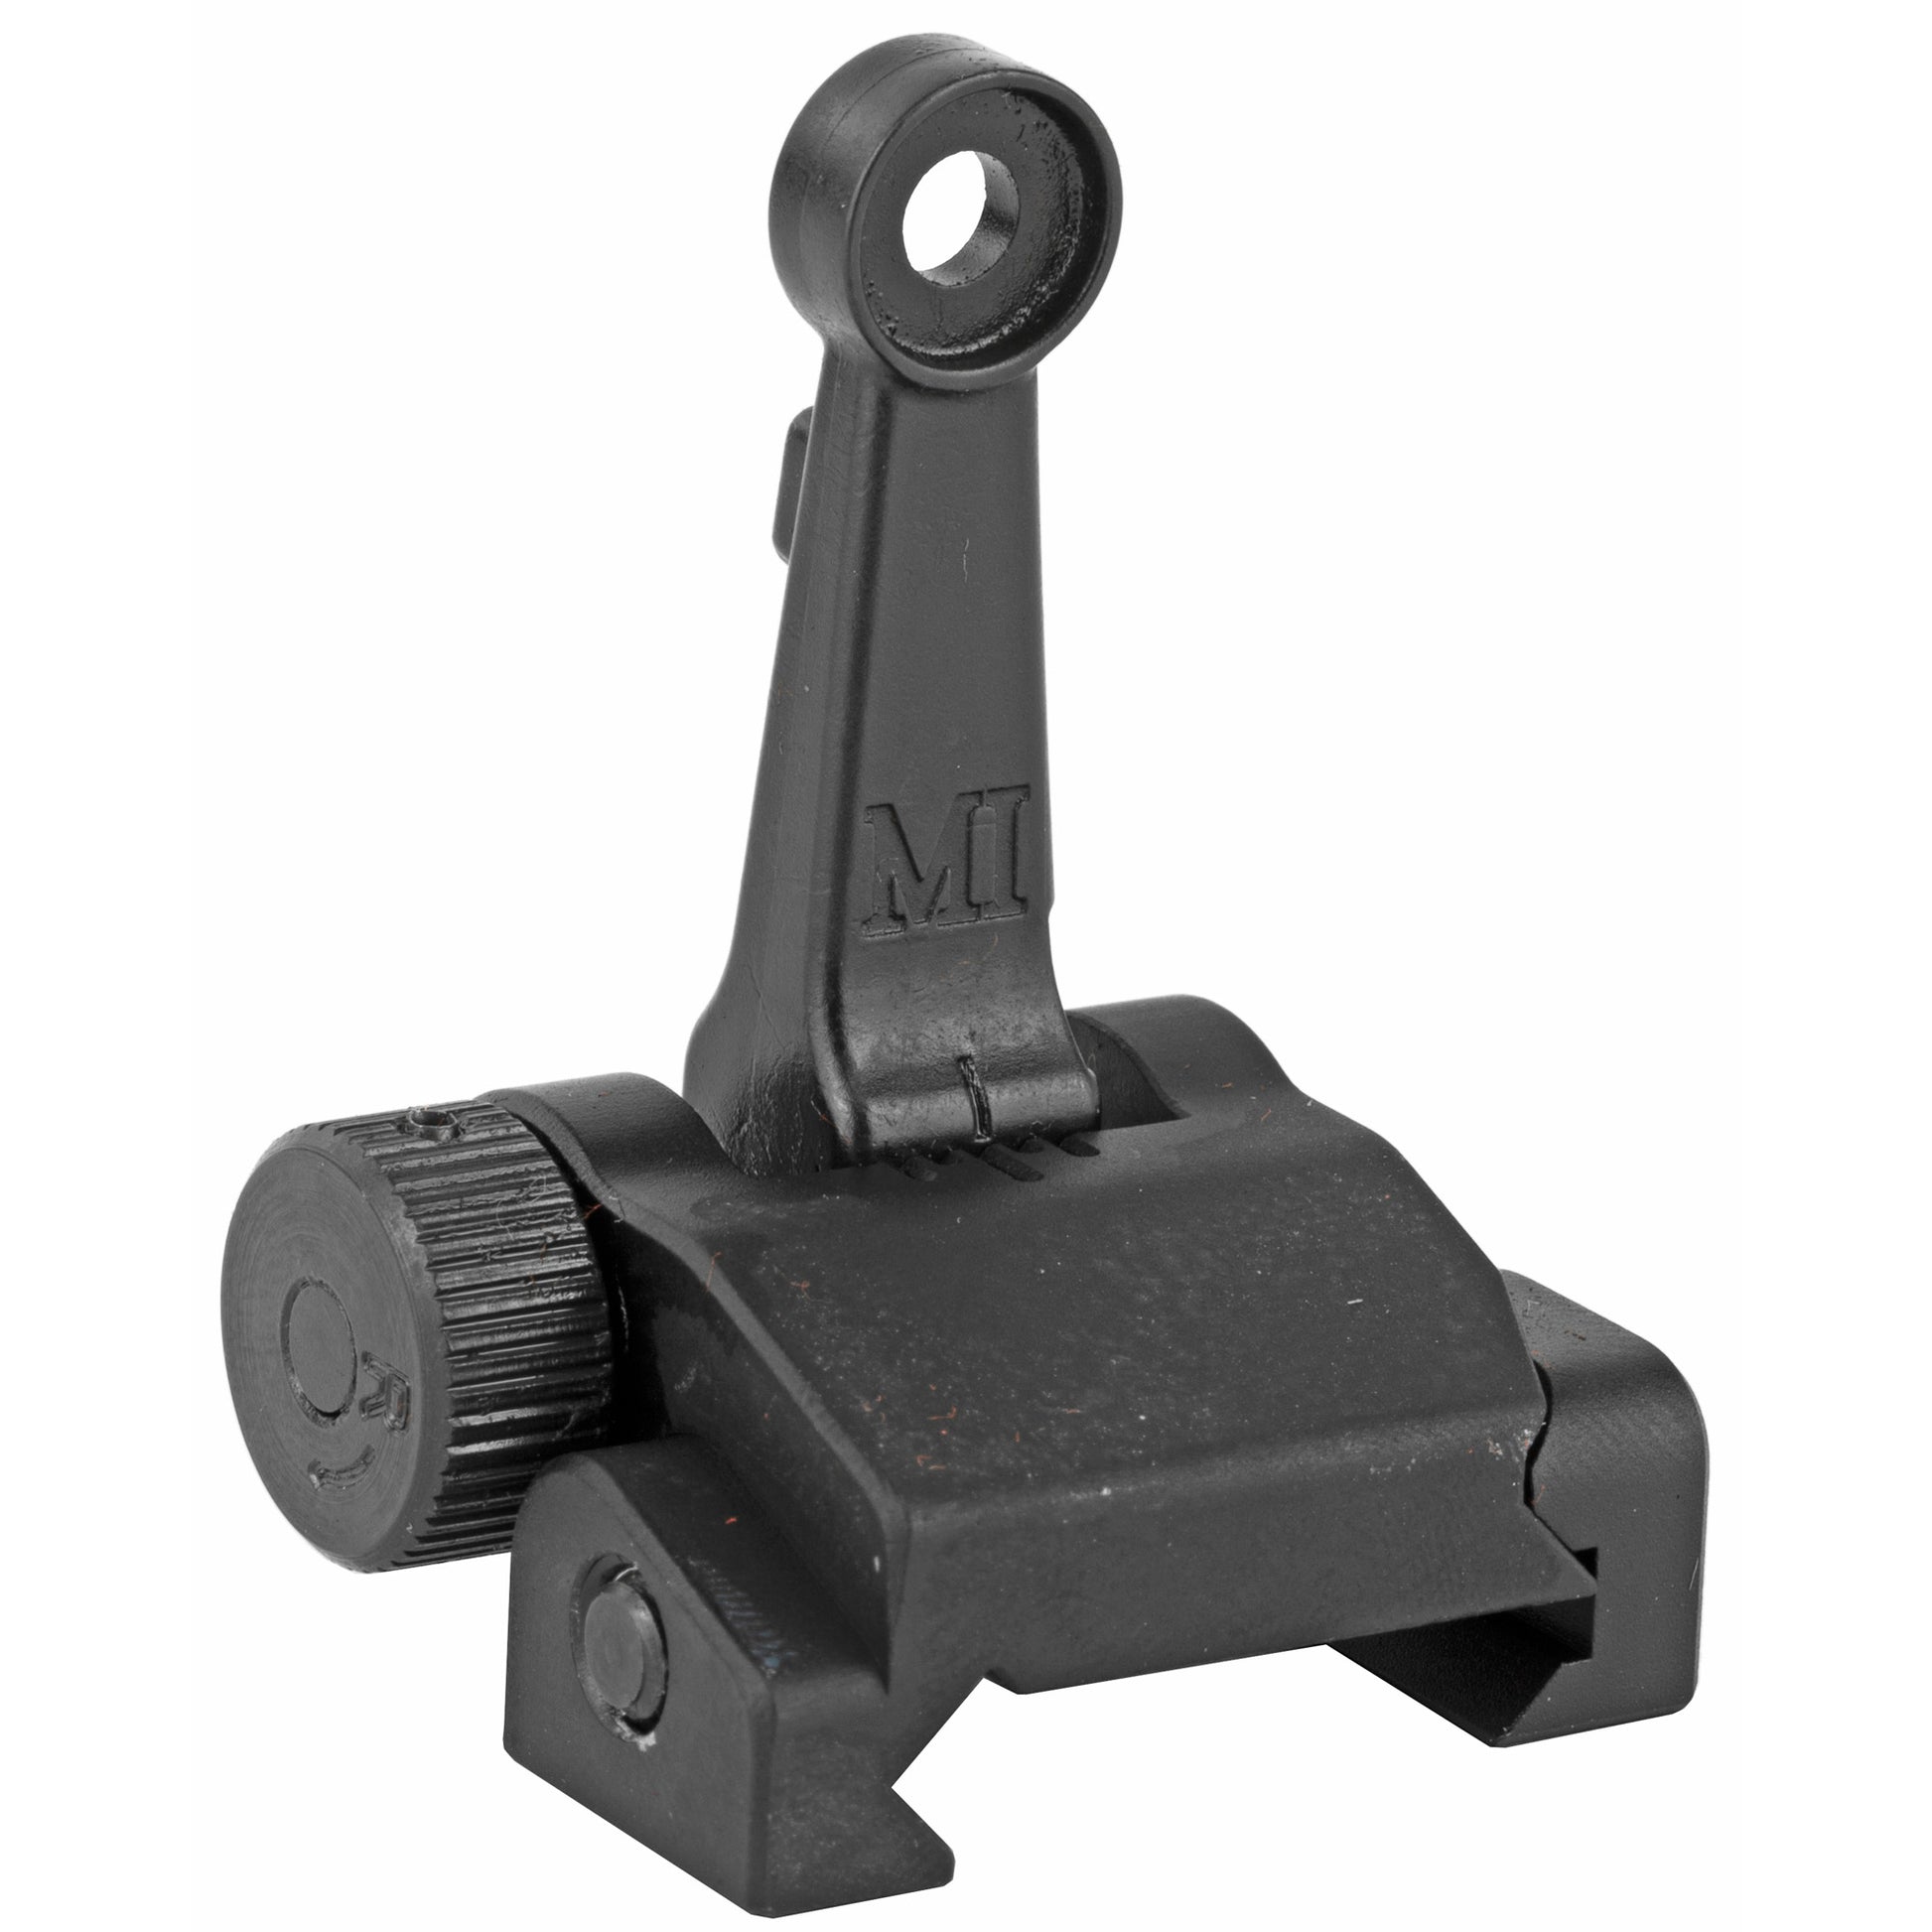 Midwest Industries Combat Rifle Rear Sight Low Profile Black Finish MI-CRS-R - California Shooting Supplies